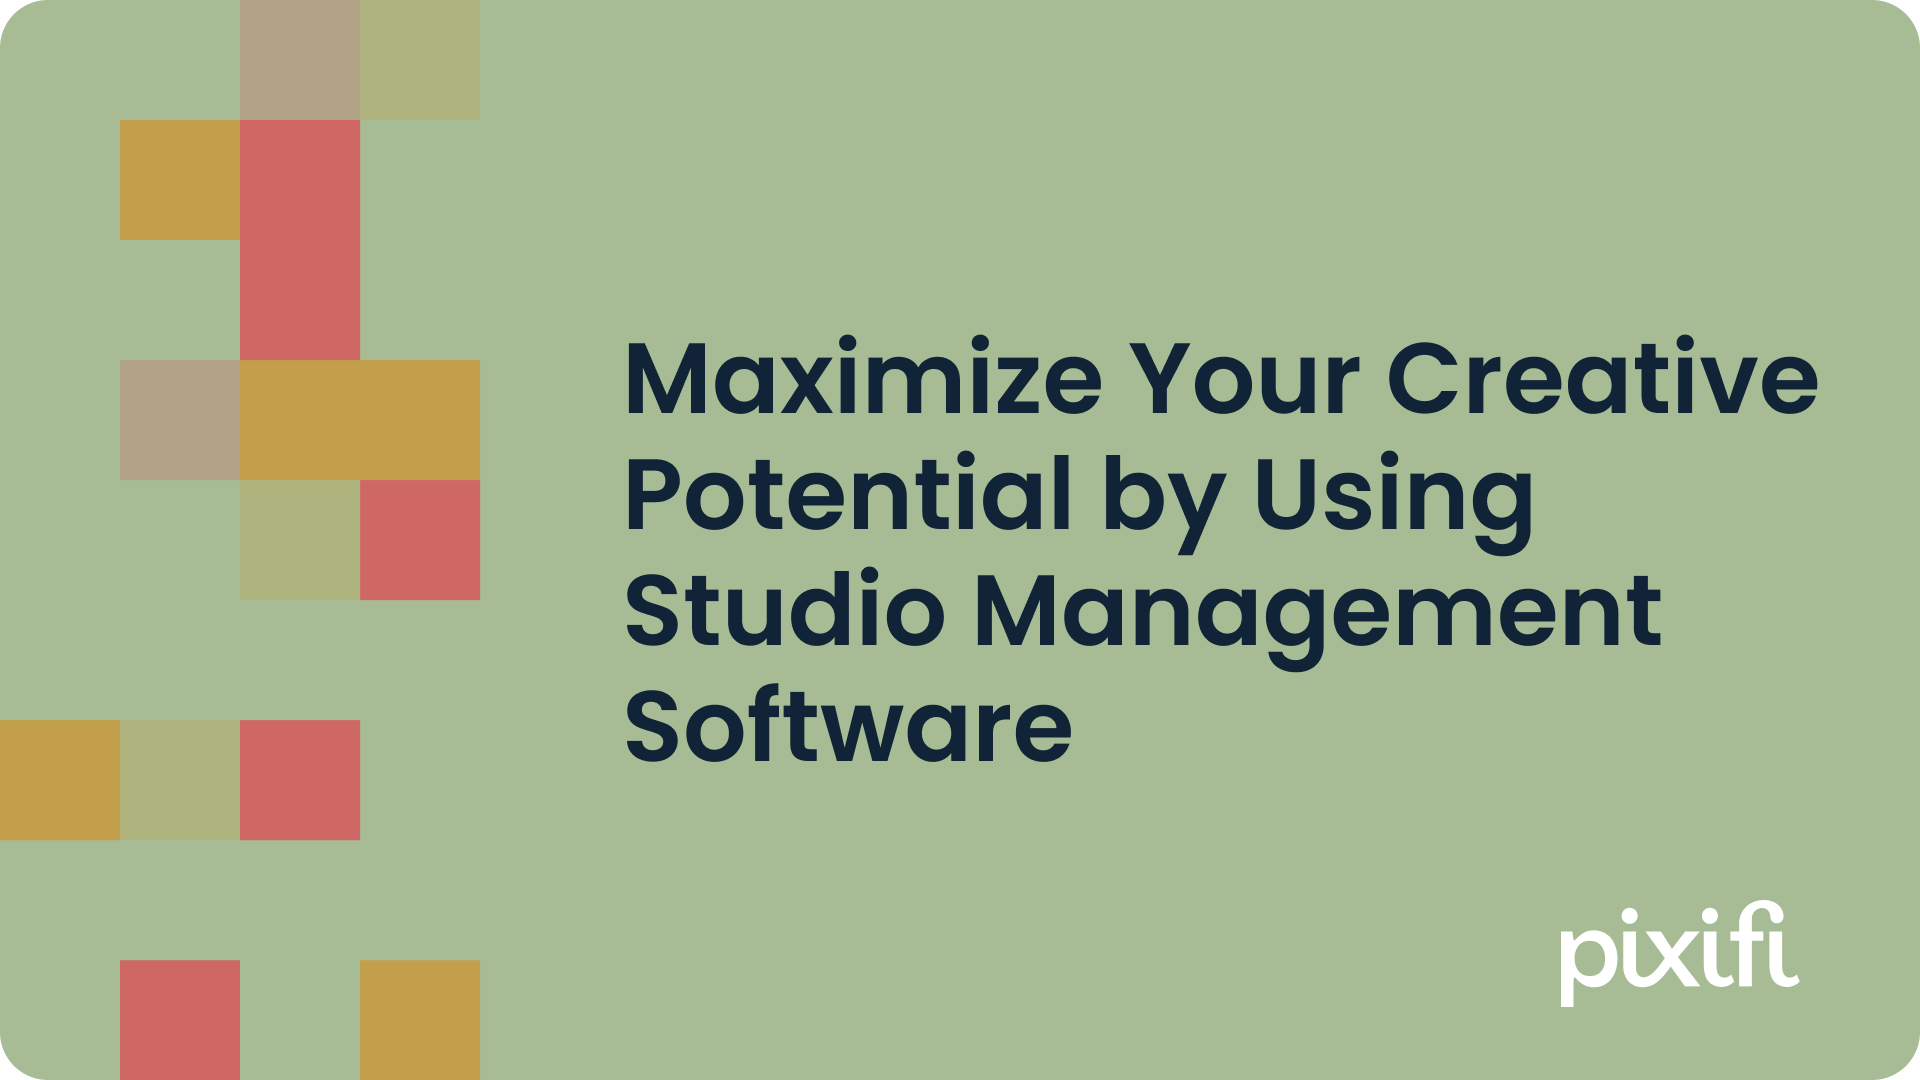 Maximize Your Creative Potential by Using Studio Management Software